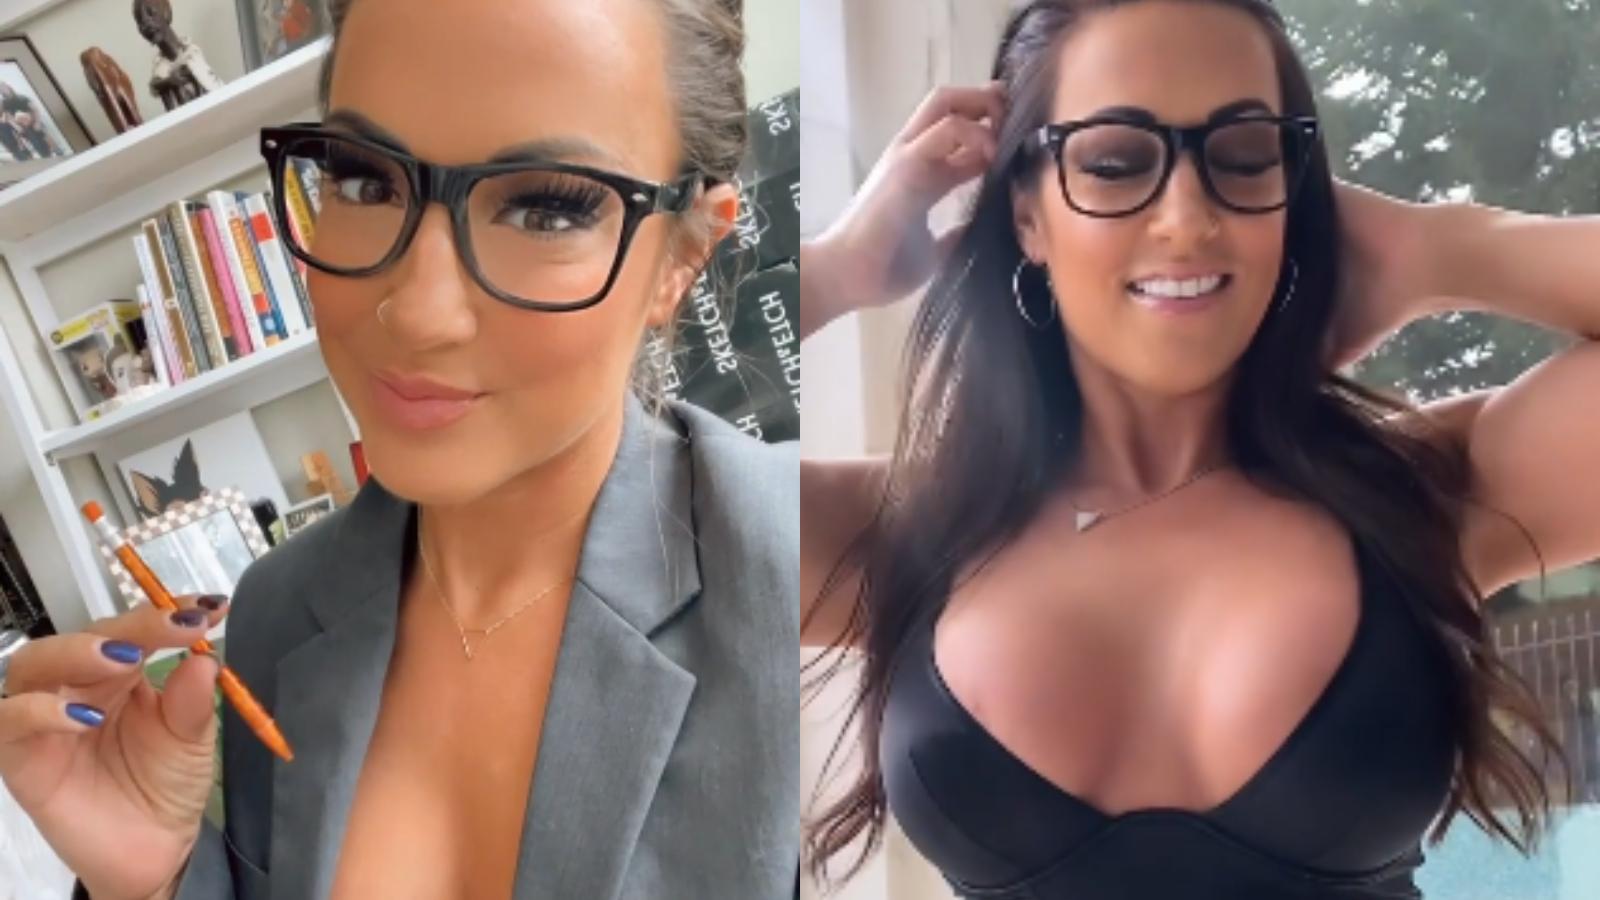 onlyfans teacher quits after being reported